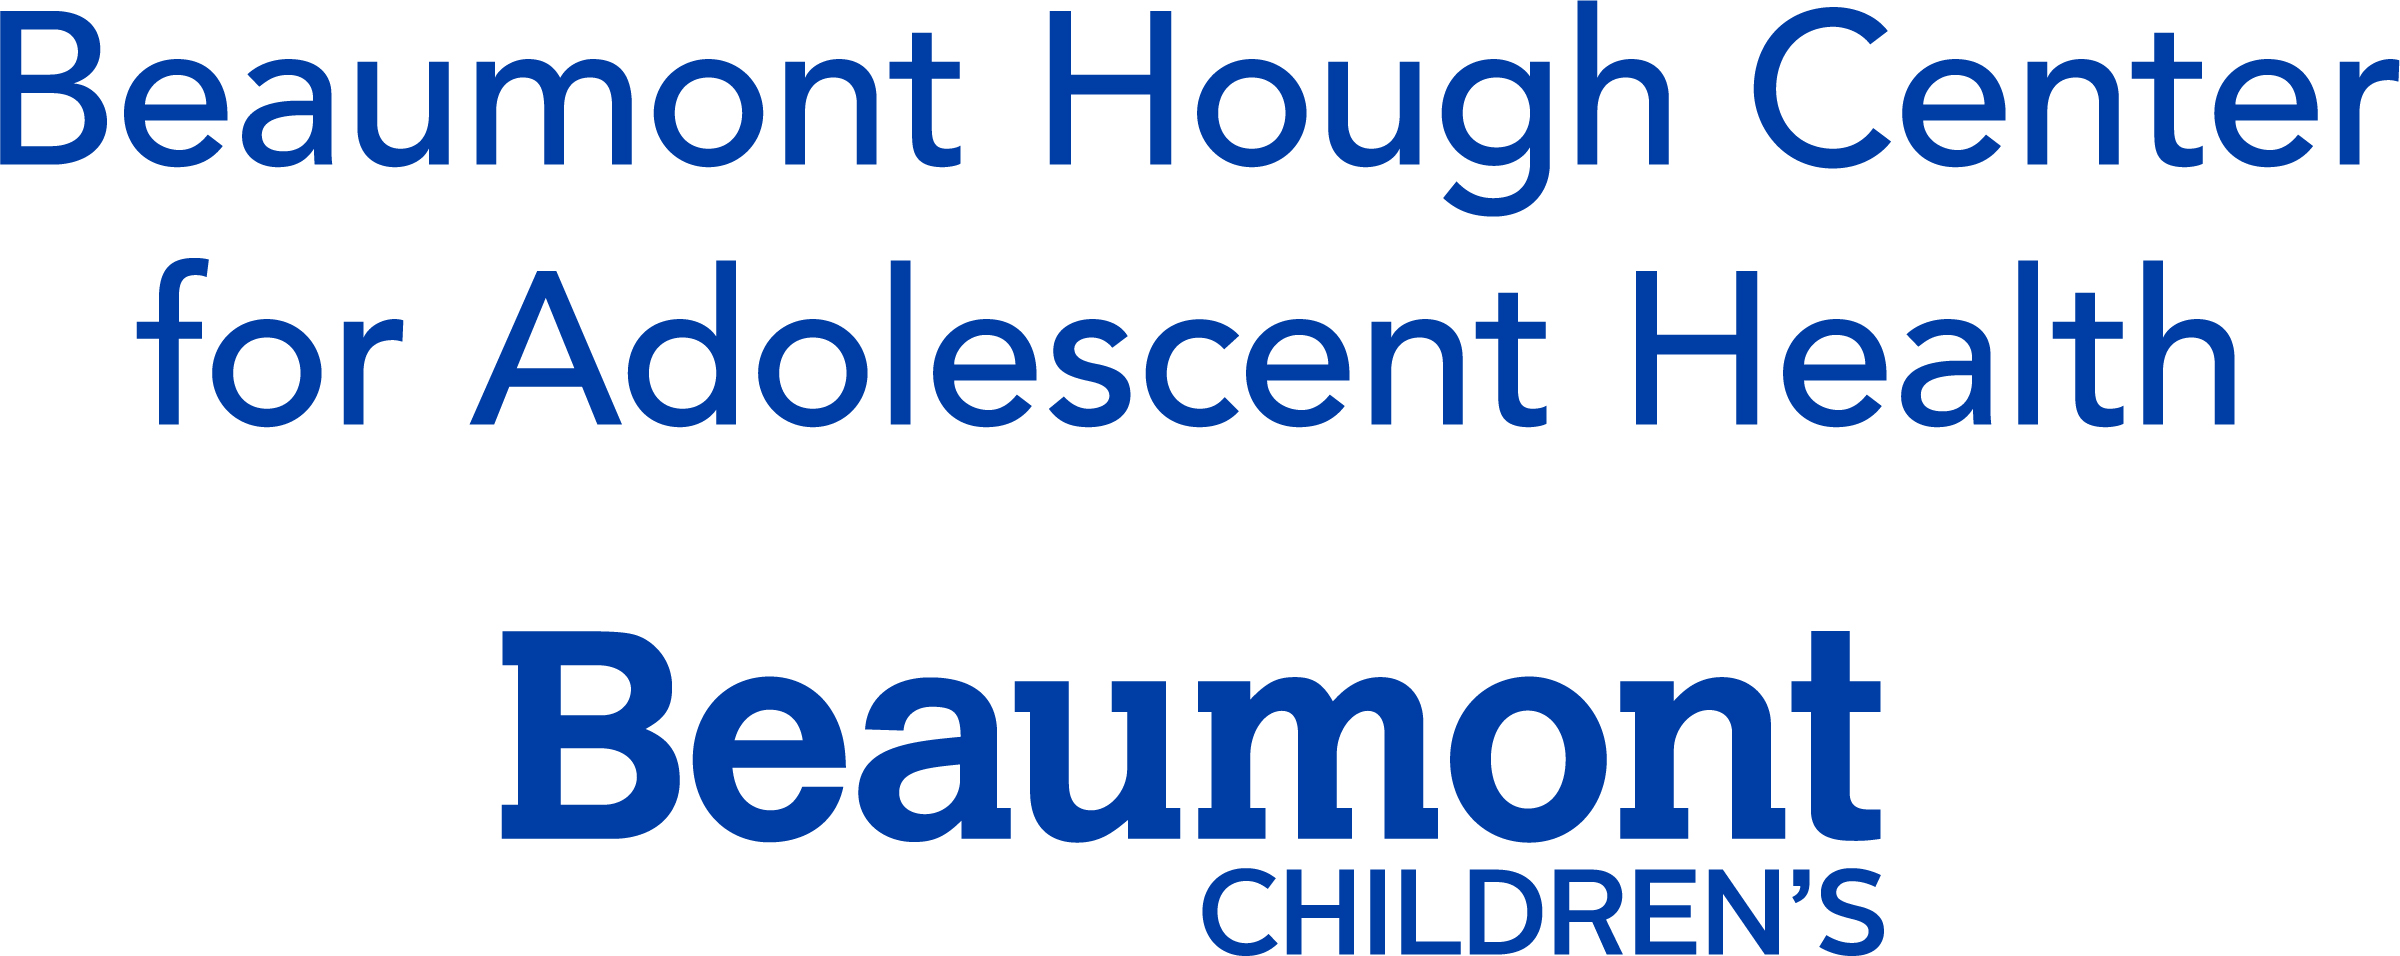 Beaumont Hough Center for Adolescent Health